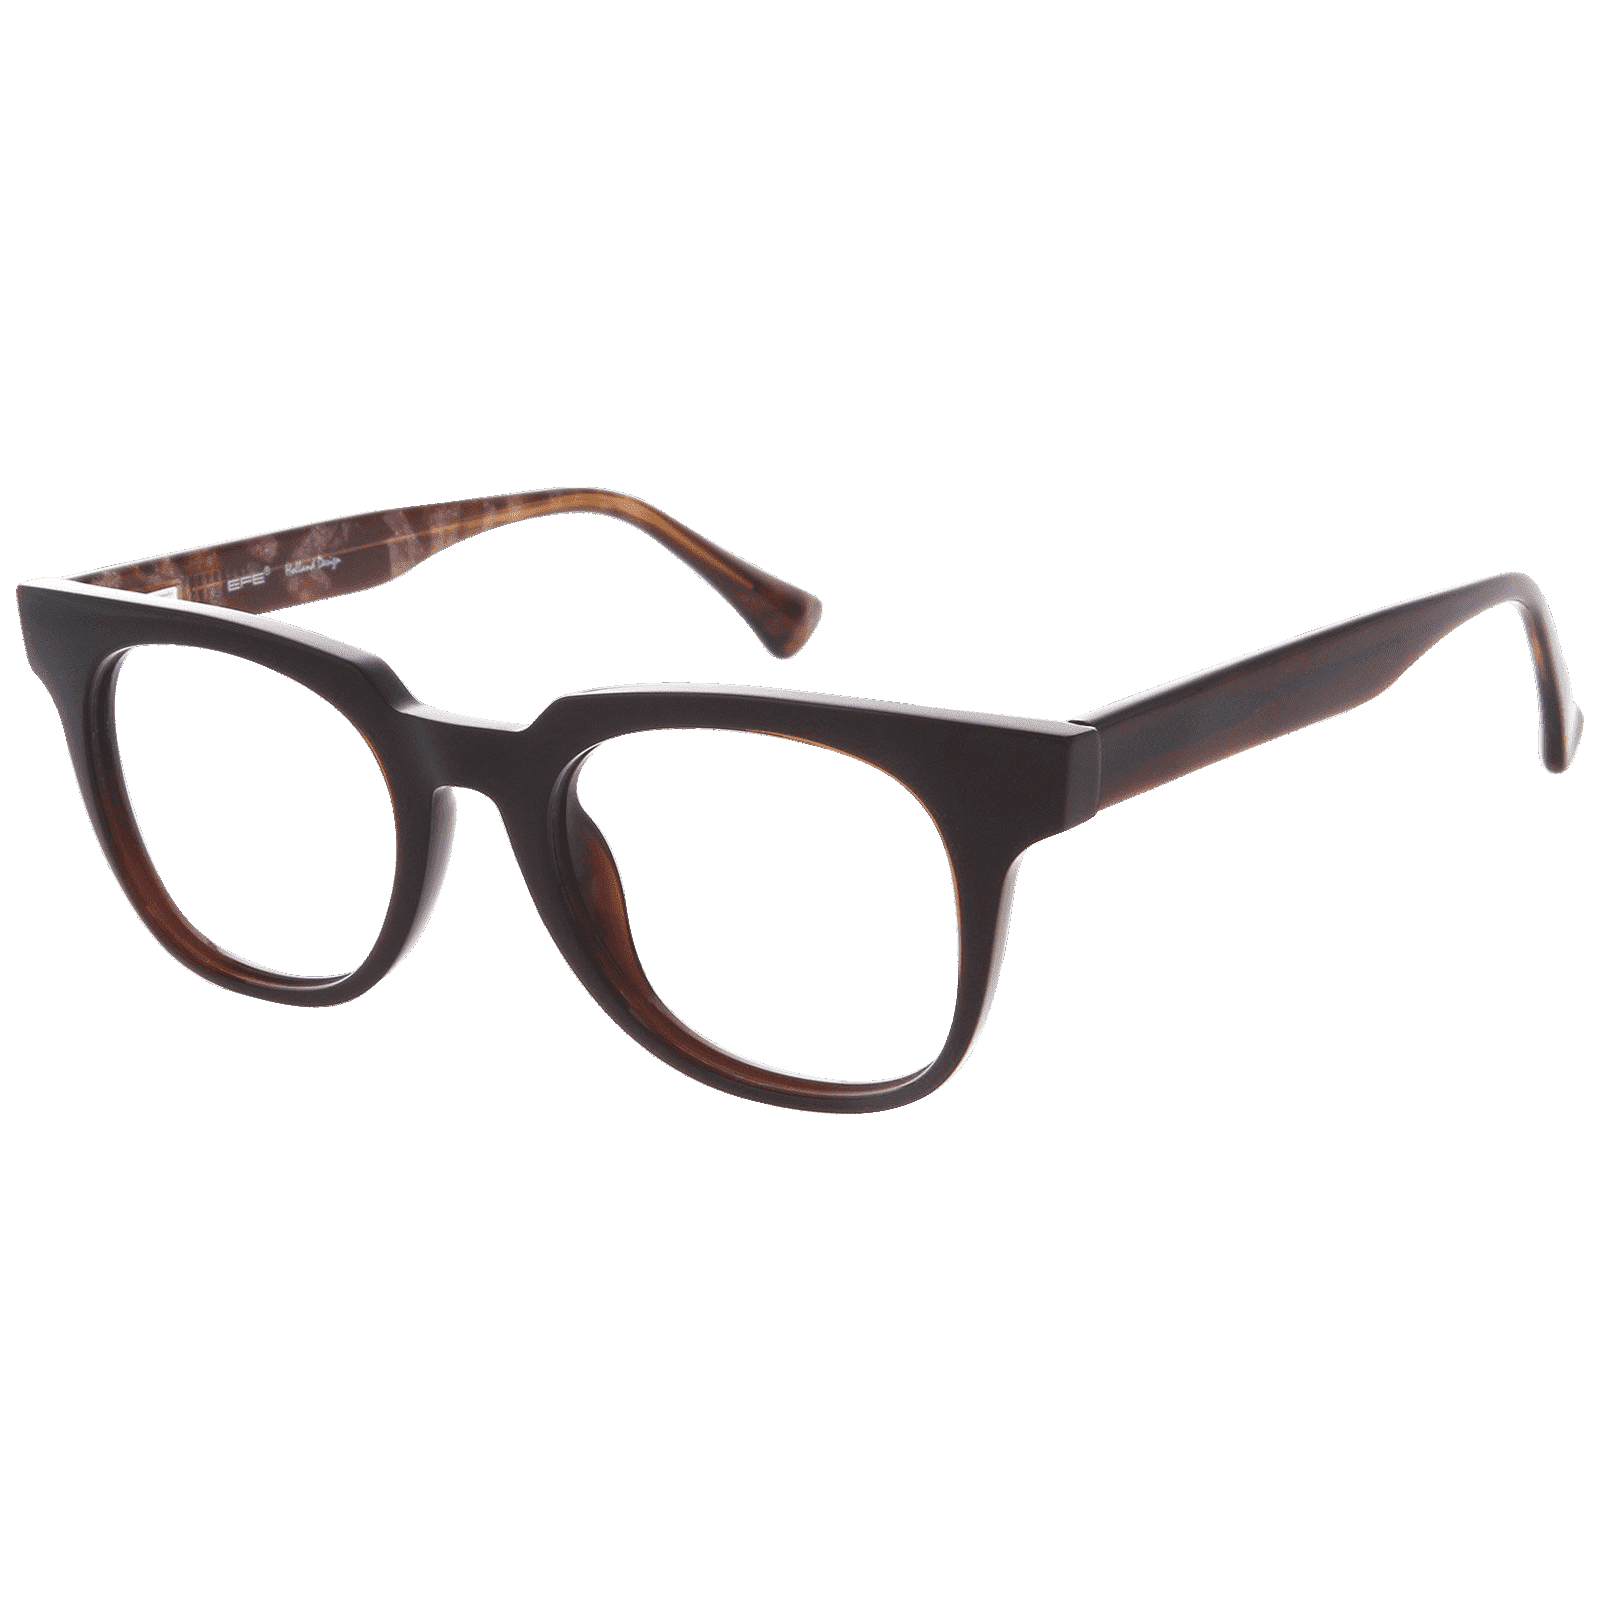 Ashwell - Square Brown Reading Glasses for Women